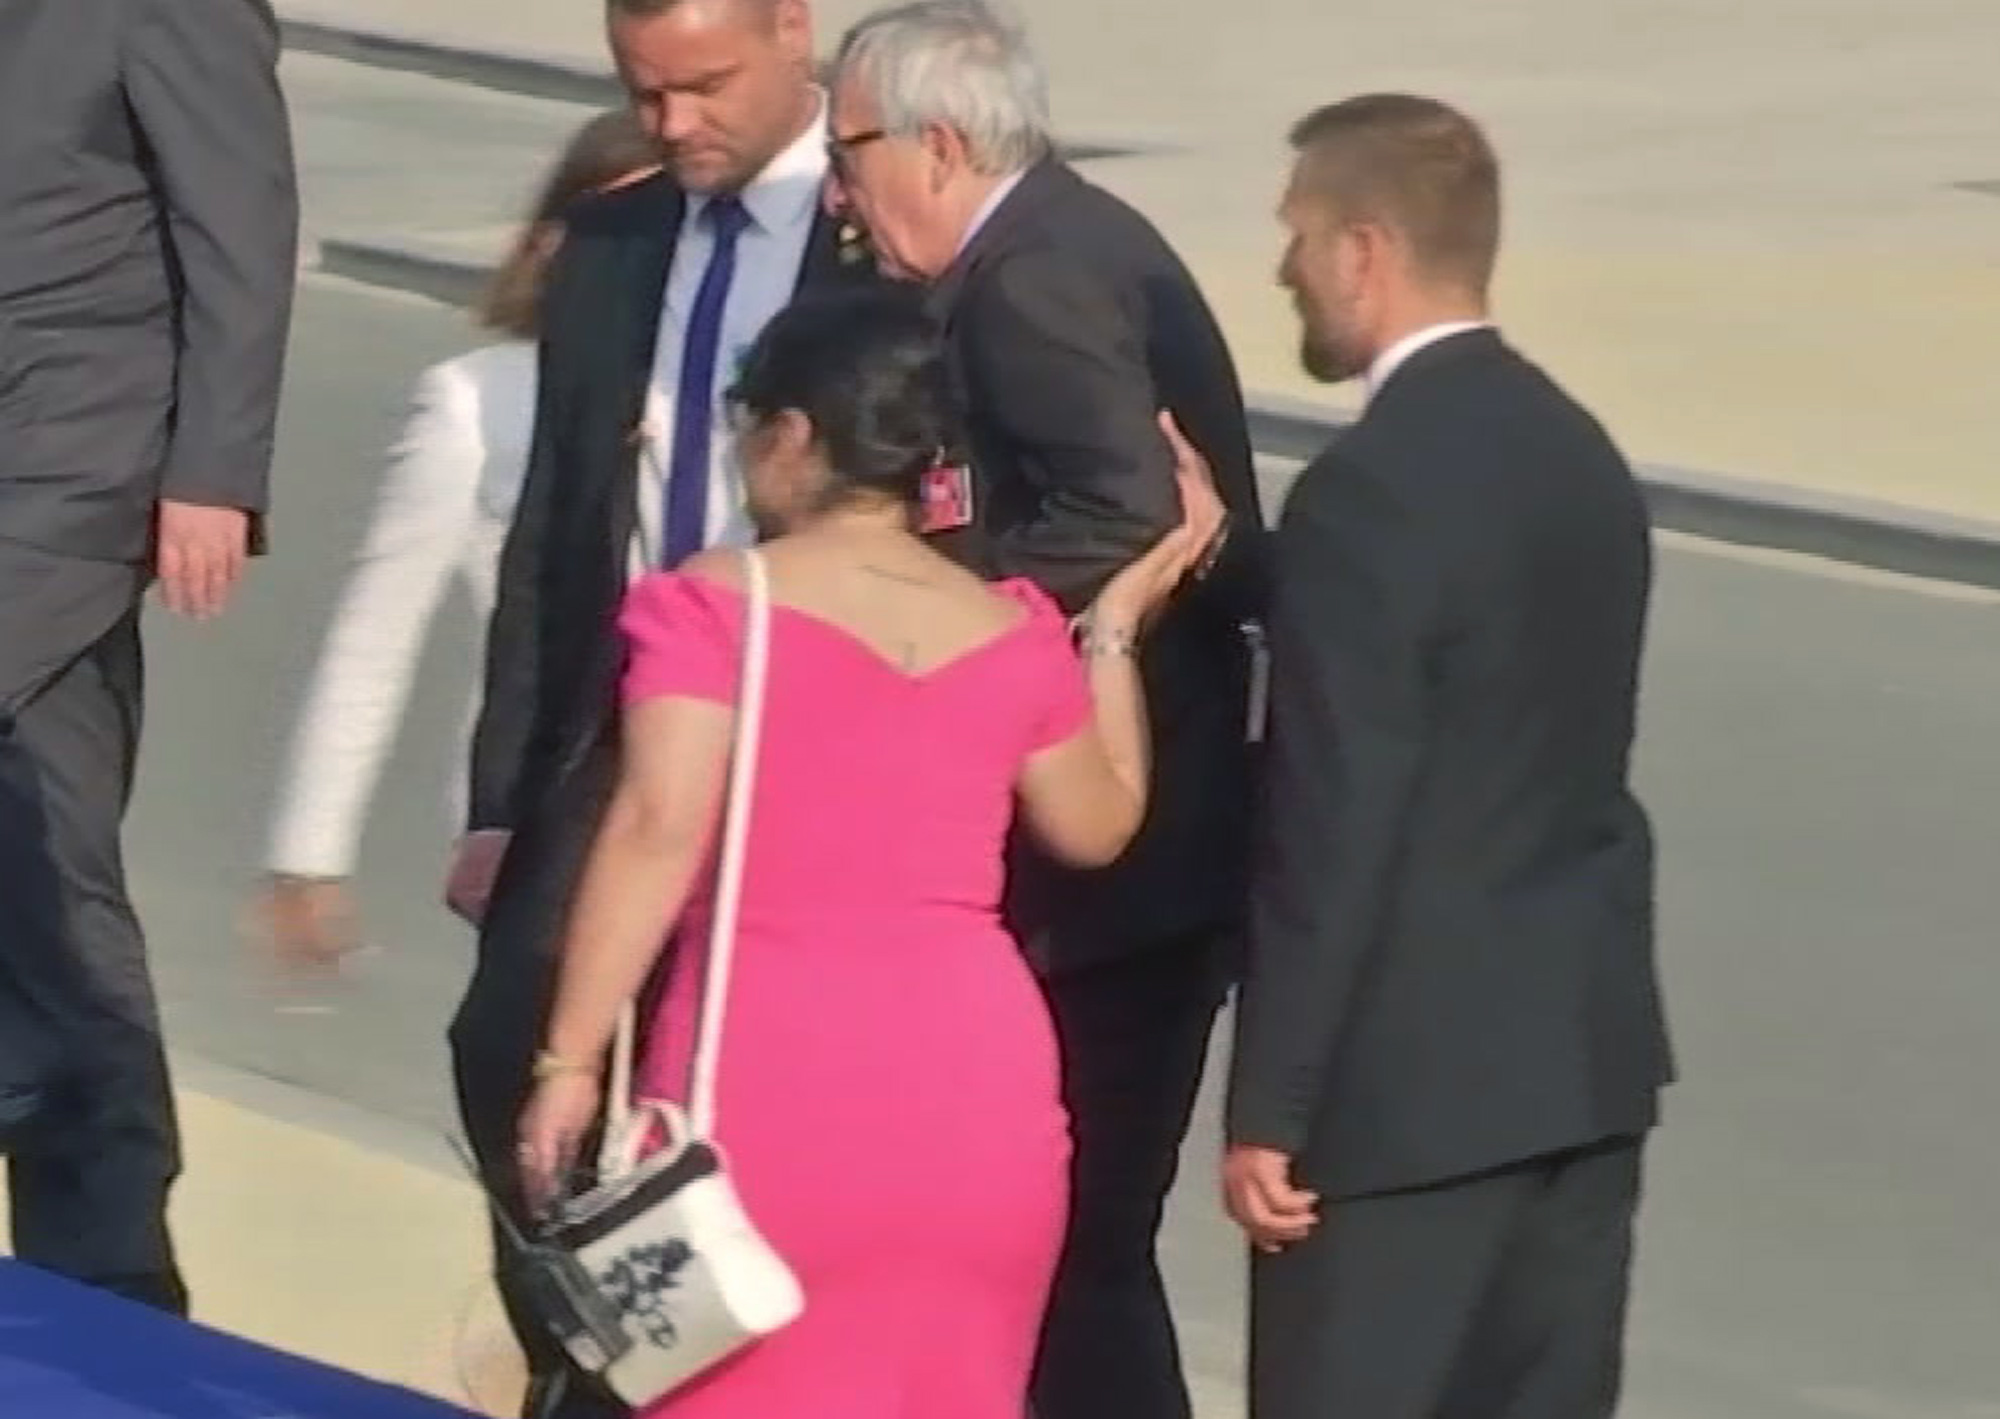 Jean-Claude Juncker is helped up the stairs at Parc Cinquantenaire in Brussels